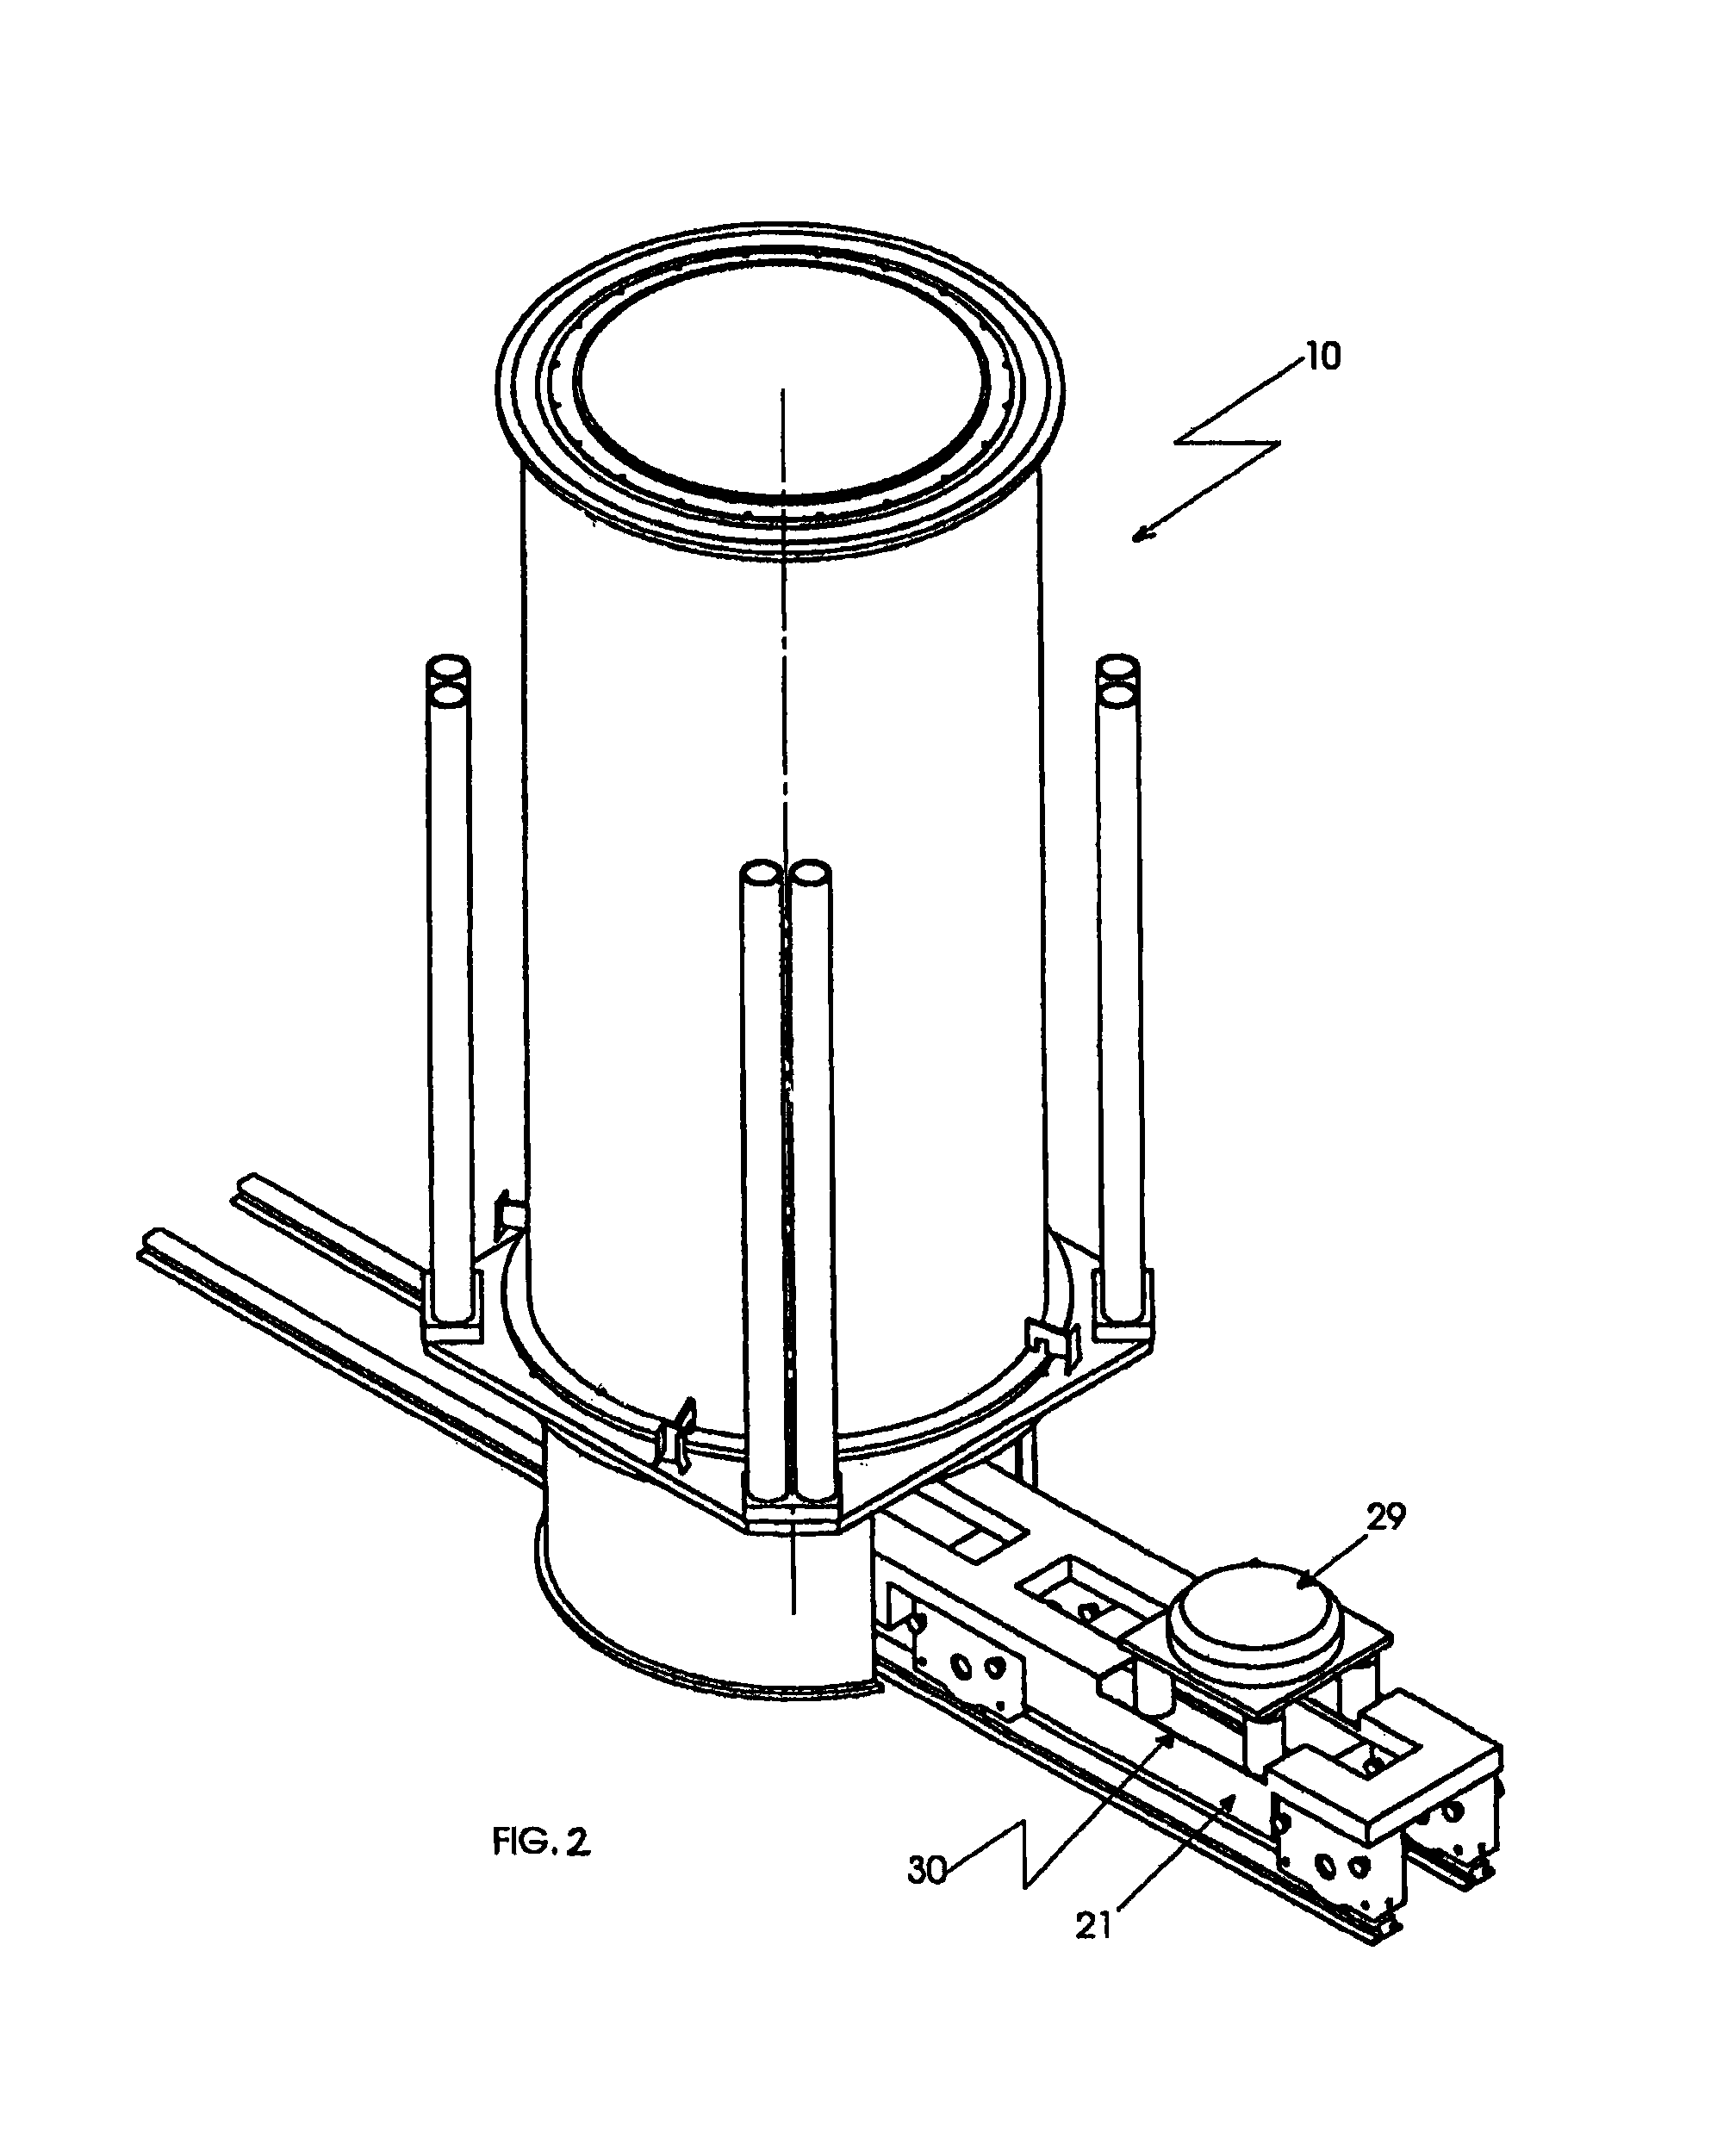 Method and device for remelting metal in an electric furnace